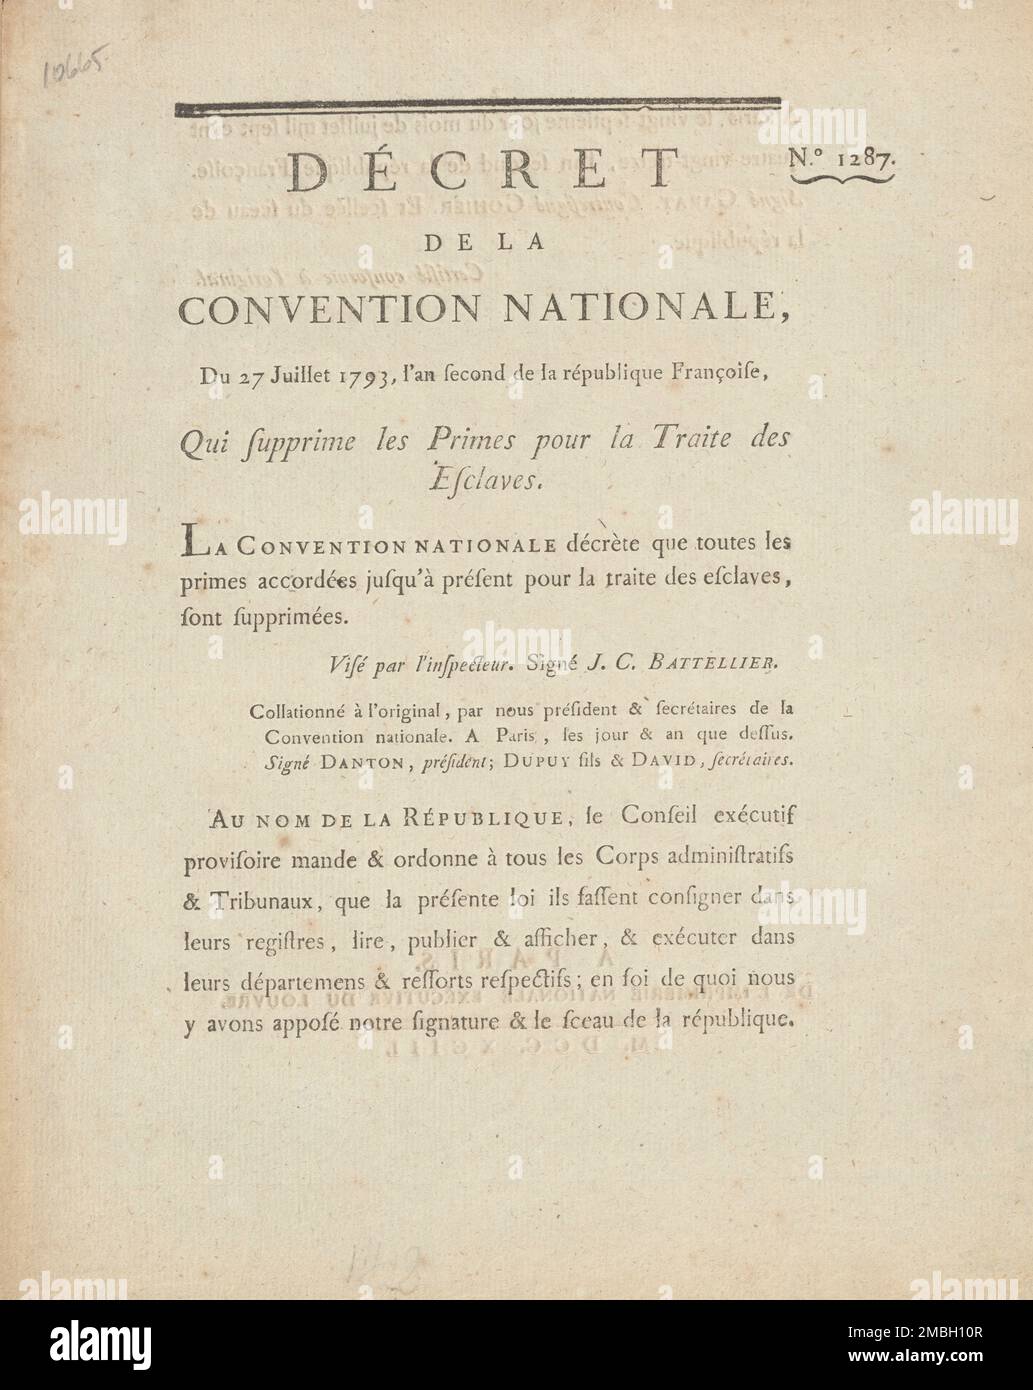 D&#xe9;cret de la Convention nationale, du 27 juillet 1793: l'an second de la R&#xe9;publique Fran&#xe7;oise, qui supprime les primes pour la traite des esclaves, 1793-07-27. Slave trade document in French. Regarding Saint-Domingue in particular, issued by the French Royal Council and the National Convention. A chronological run of the Arretes du Conseil d&#x2019;Etat du Roi. The first appoints a commission to oversee the French colonies. The second gives the Compagnie de la Guyane exclusive rights to the West African slave trade out of Goree in Africa. The third sets out the rules regulating Stock Photo